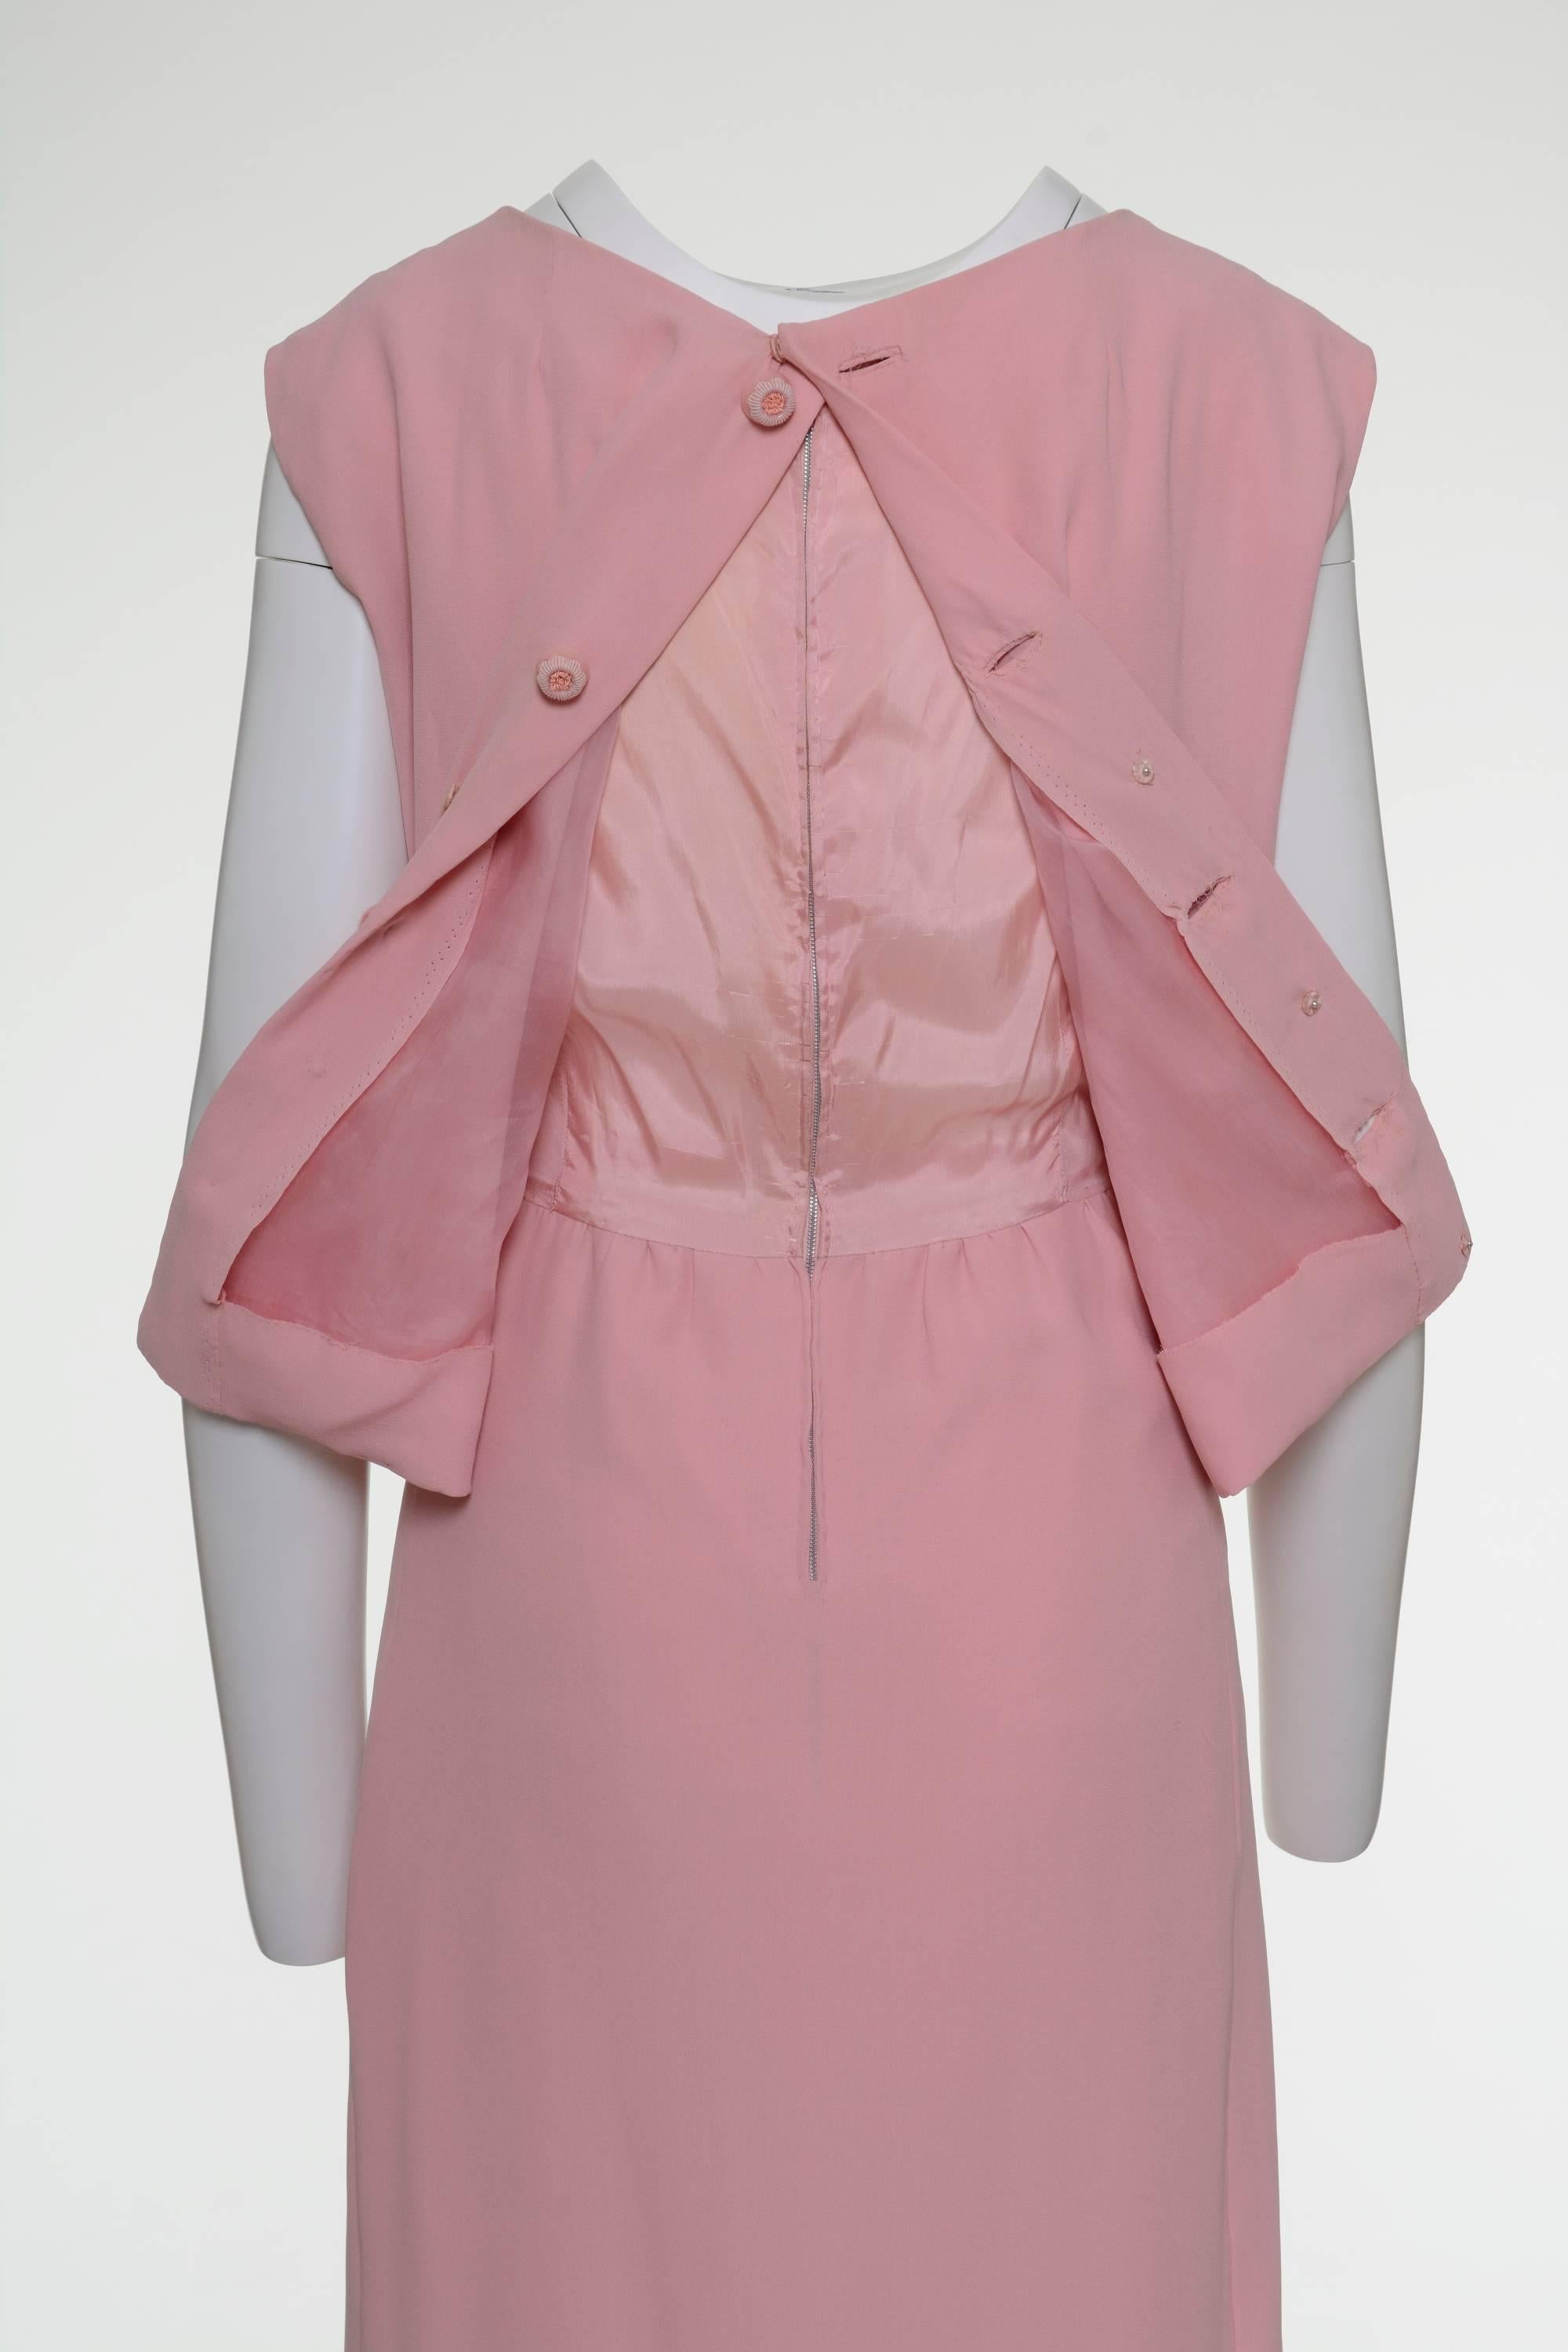 Women's 1960s Pink Cocktail Dress with black plumage on a stole  For Sale